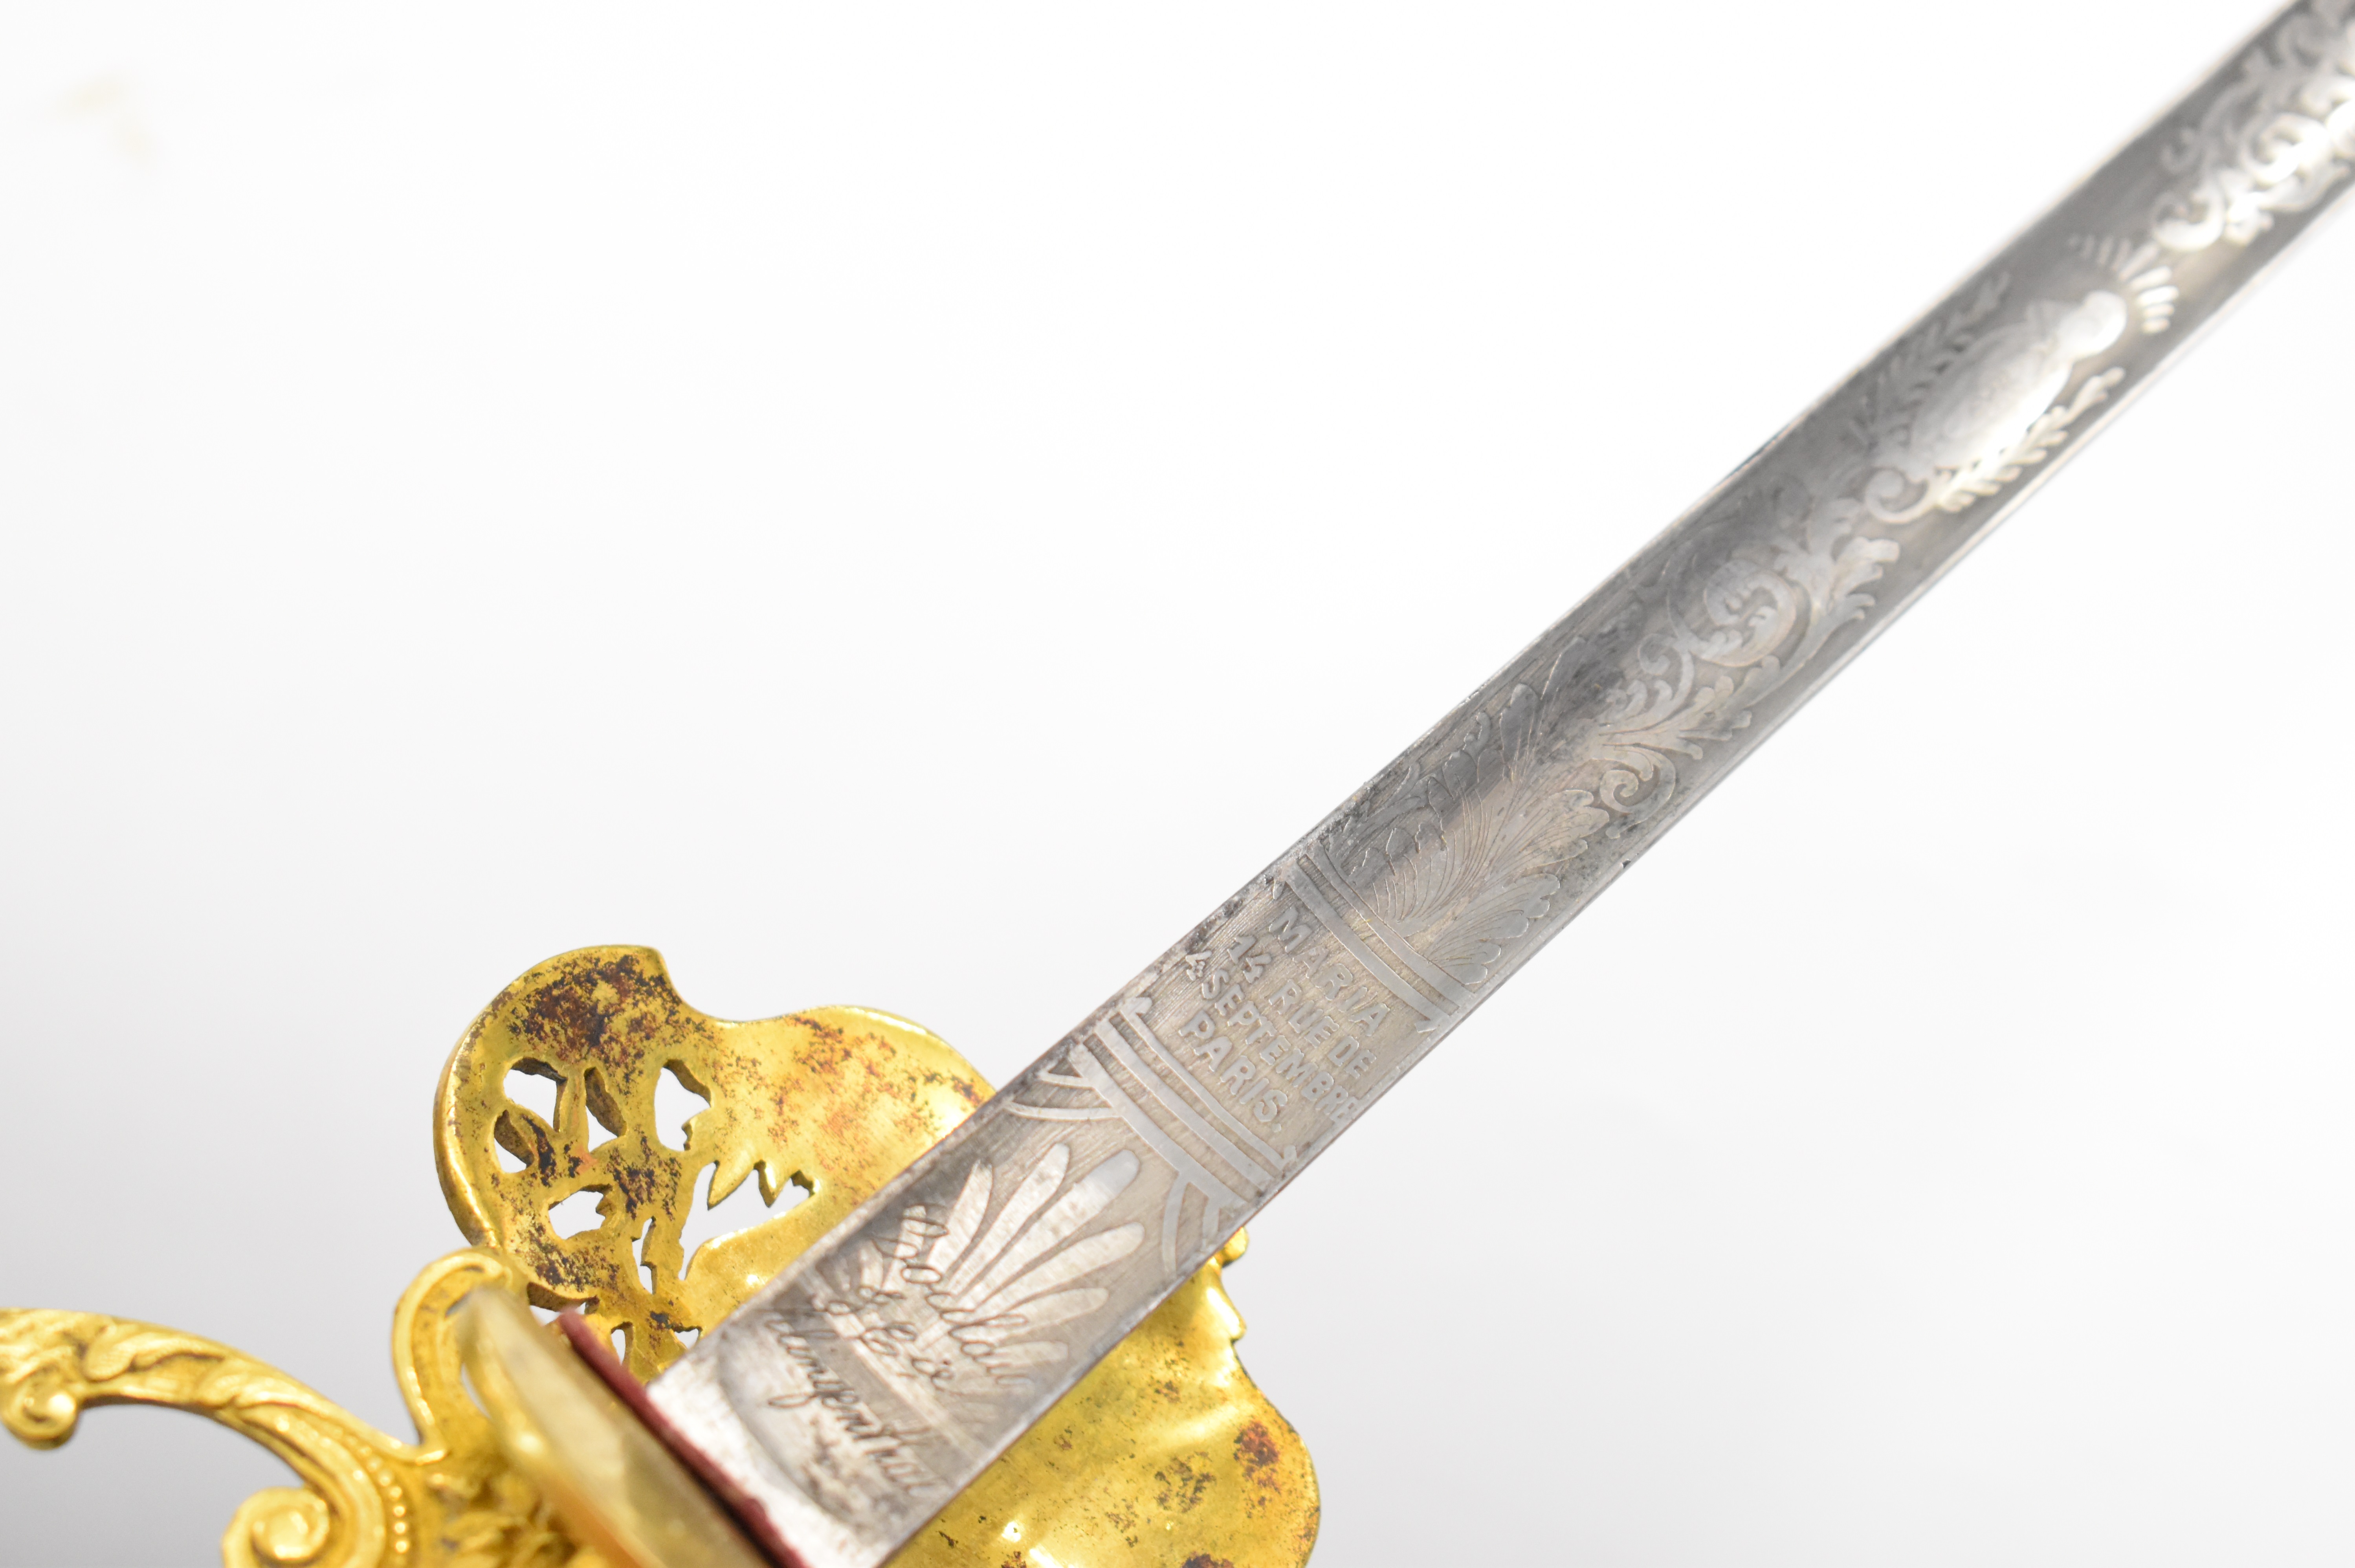 French made court sword retailed by Maria 14 Rue de Septembre Paris with gilt decorated hilt and - Image 9 of 11